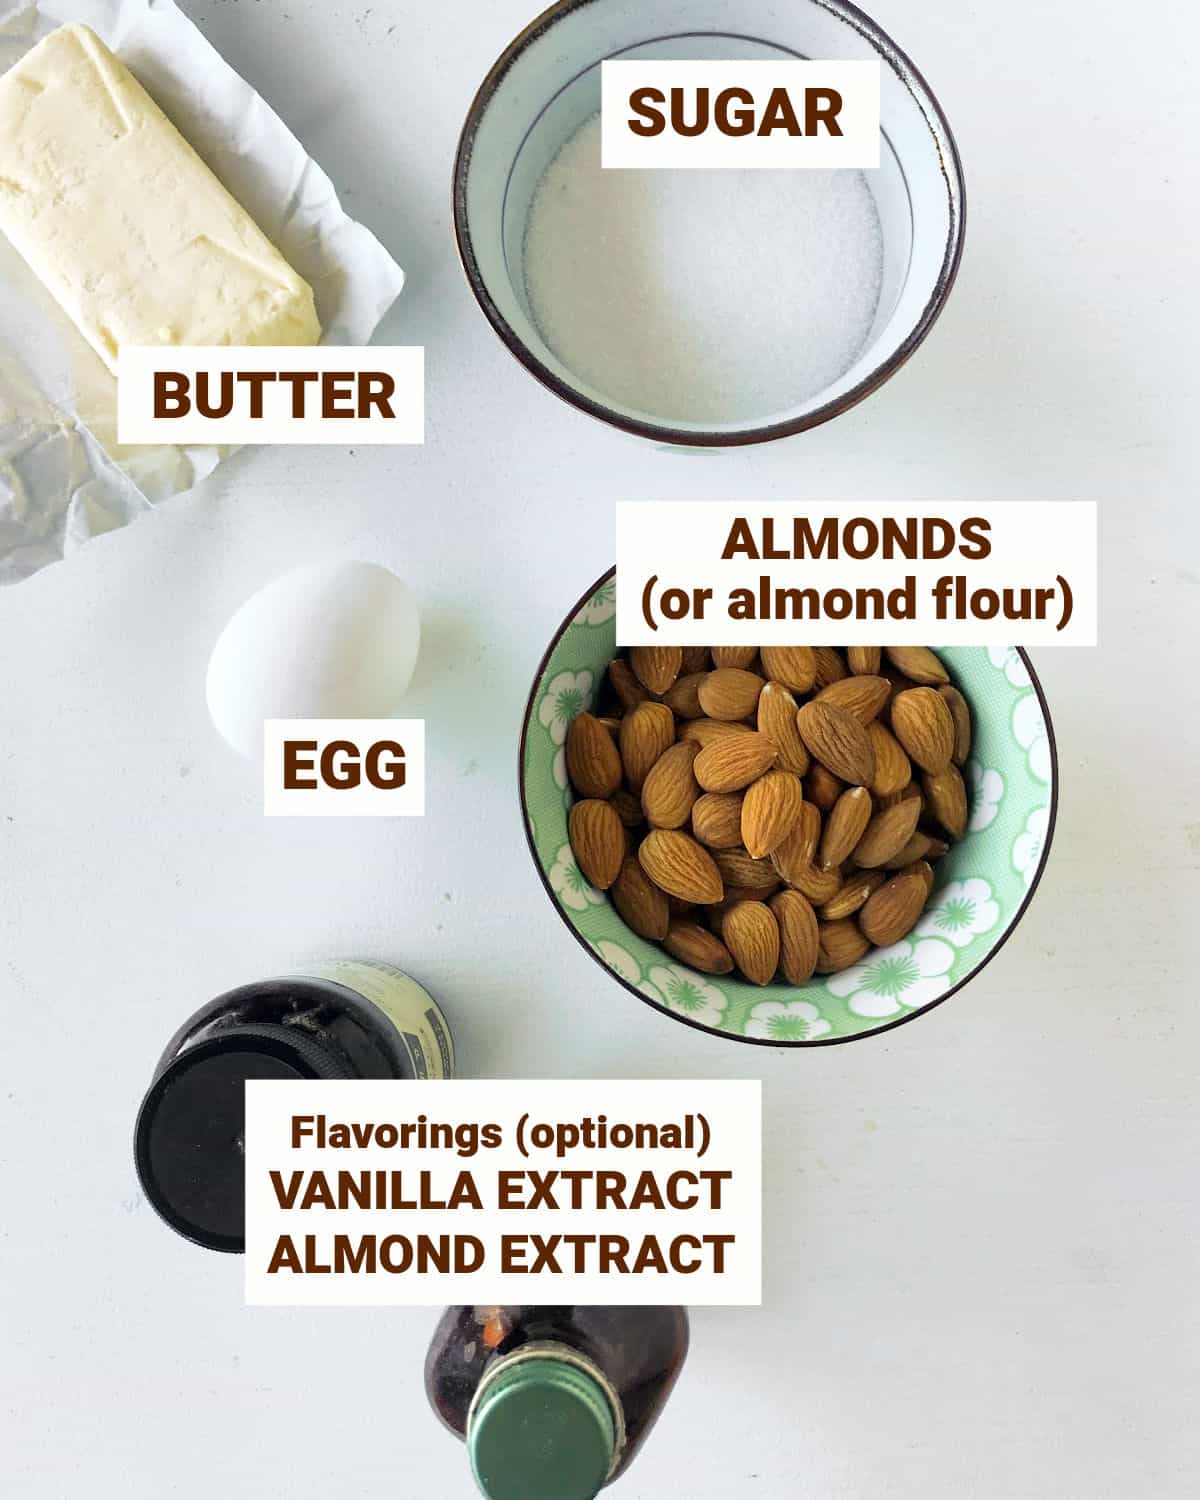 Ingredients for almond cream in bowls on a white surface including butter, sugar, egg, flavorings.